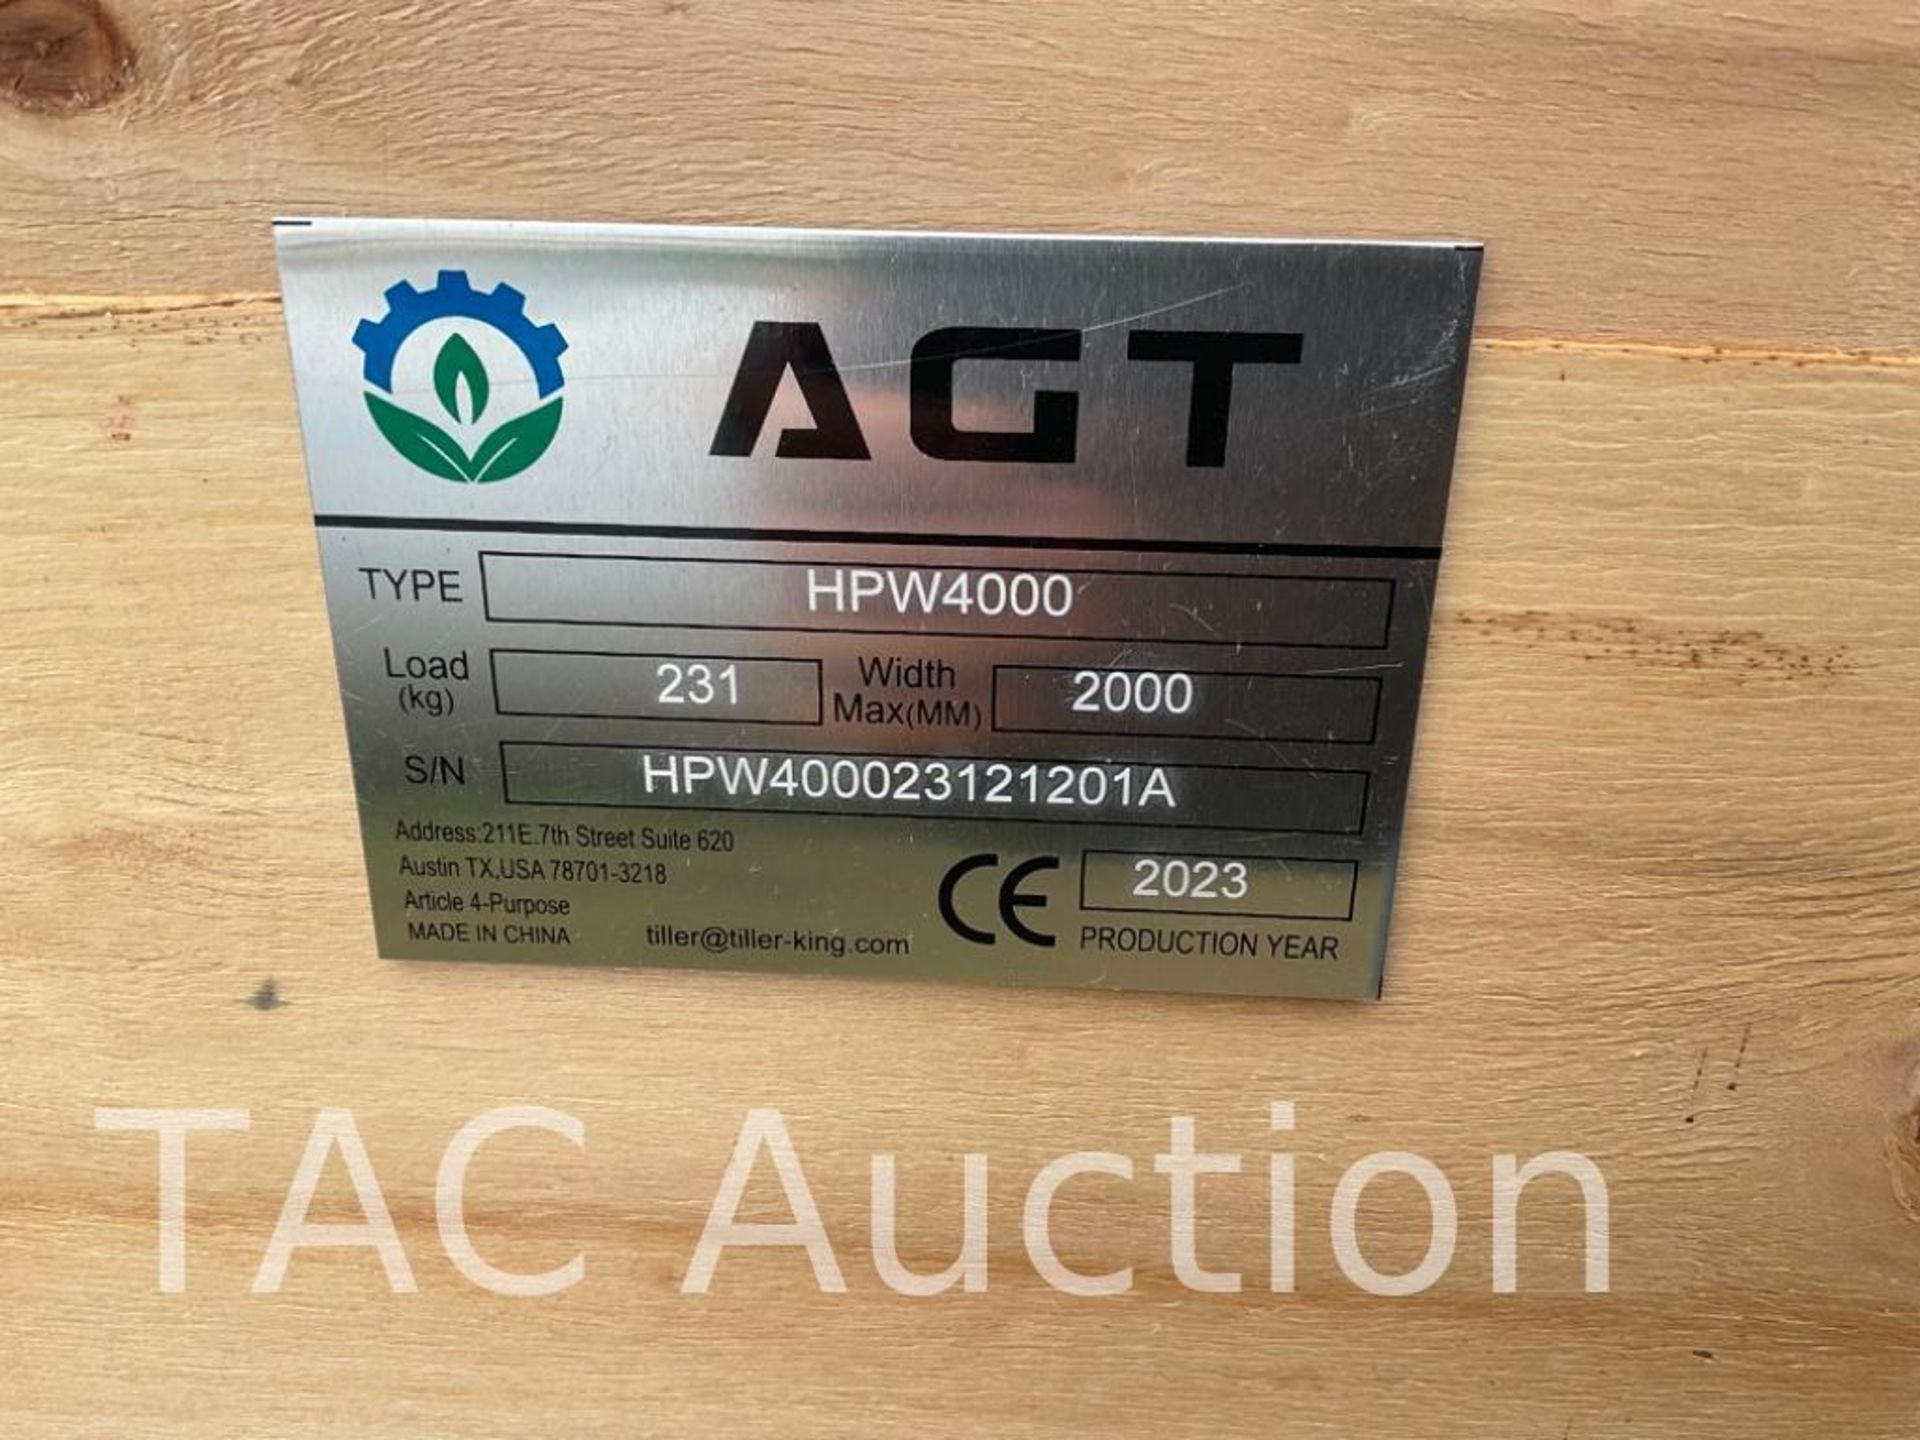 New AGT HPW4000 Hot Water Pressure Washer - Image 4 of 5